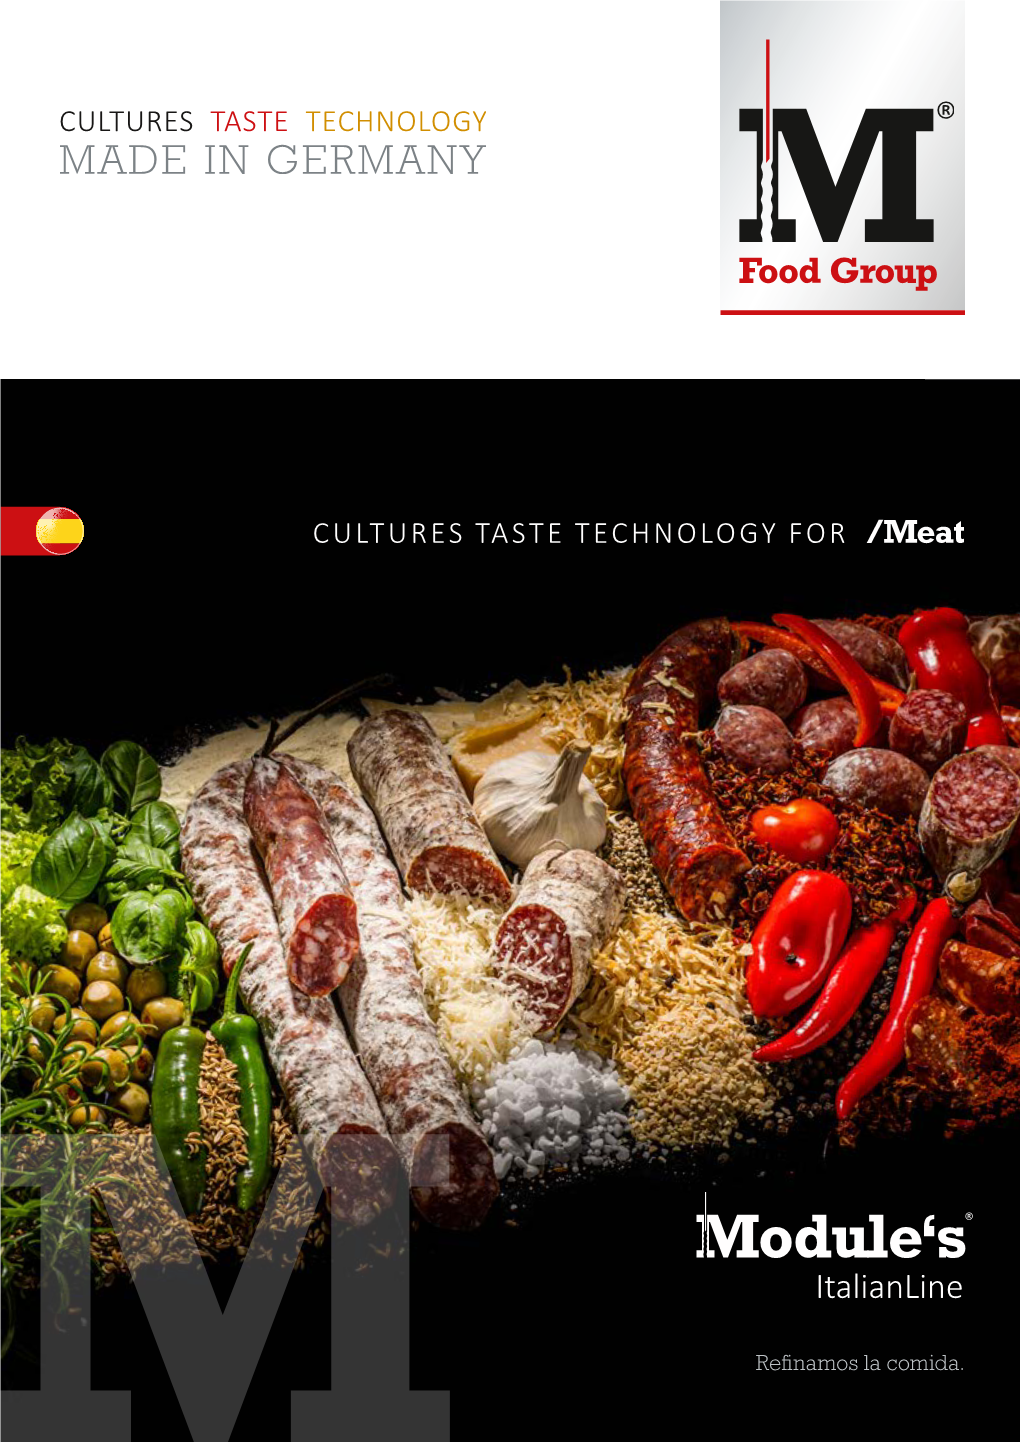 CULTURES TASTE TECHNOLOGY for /Meat